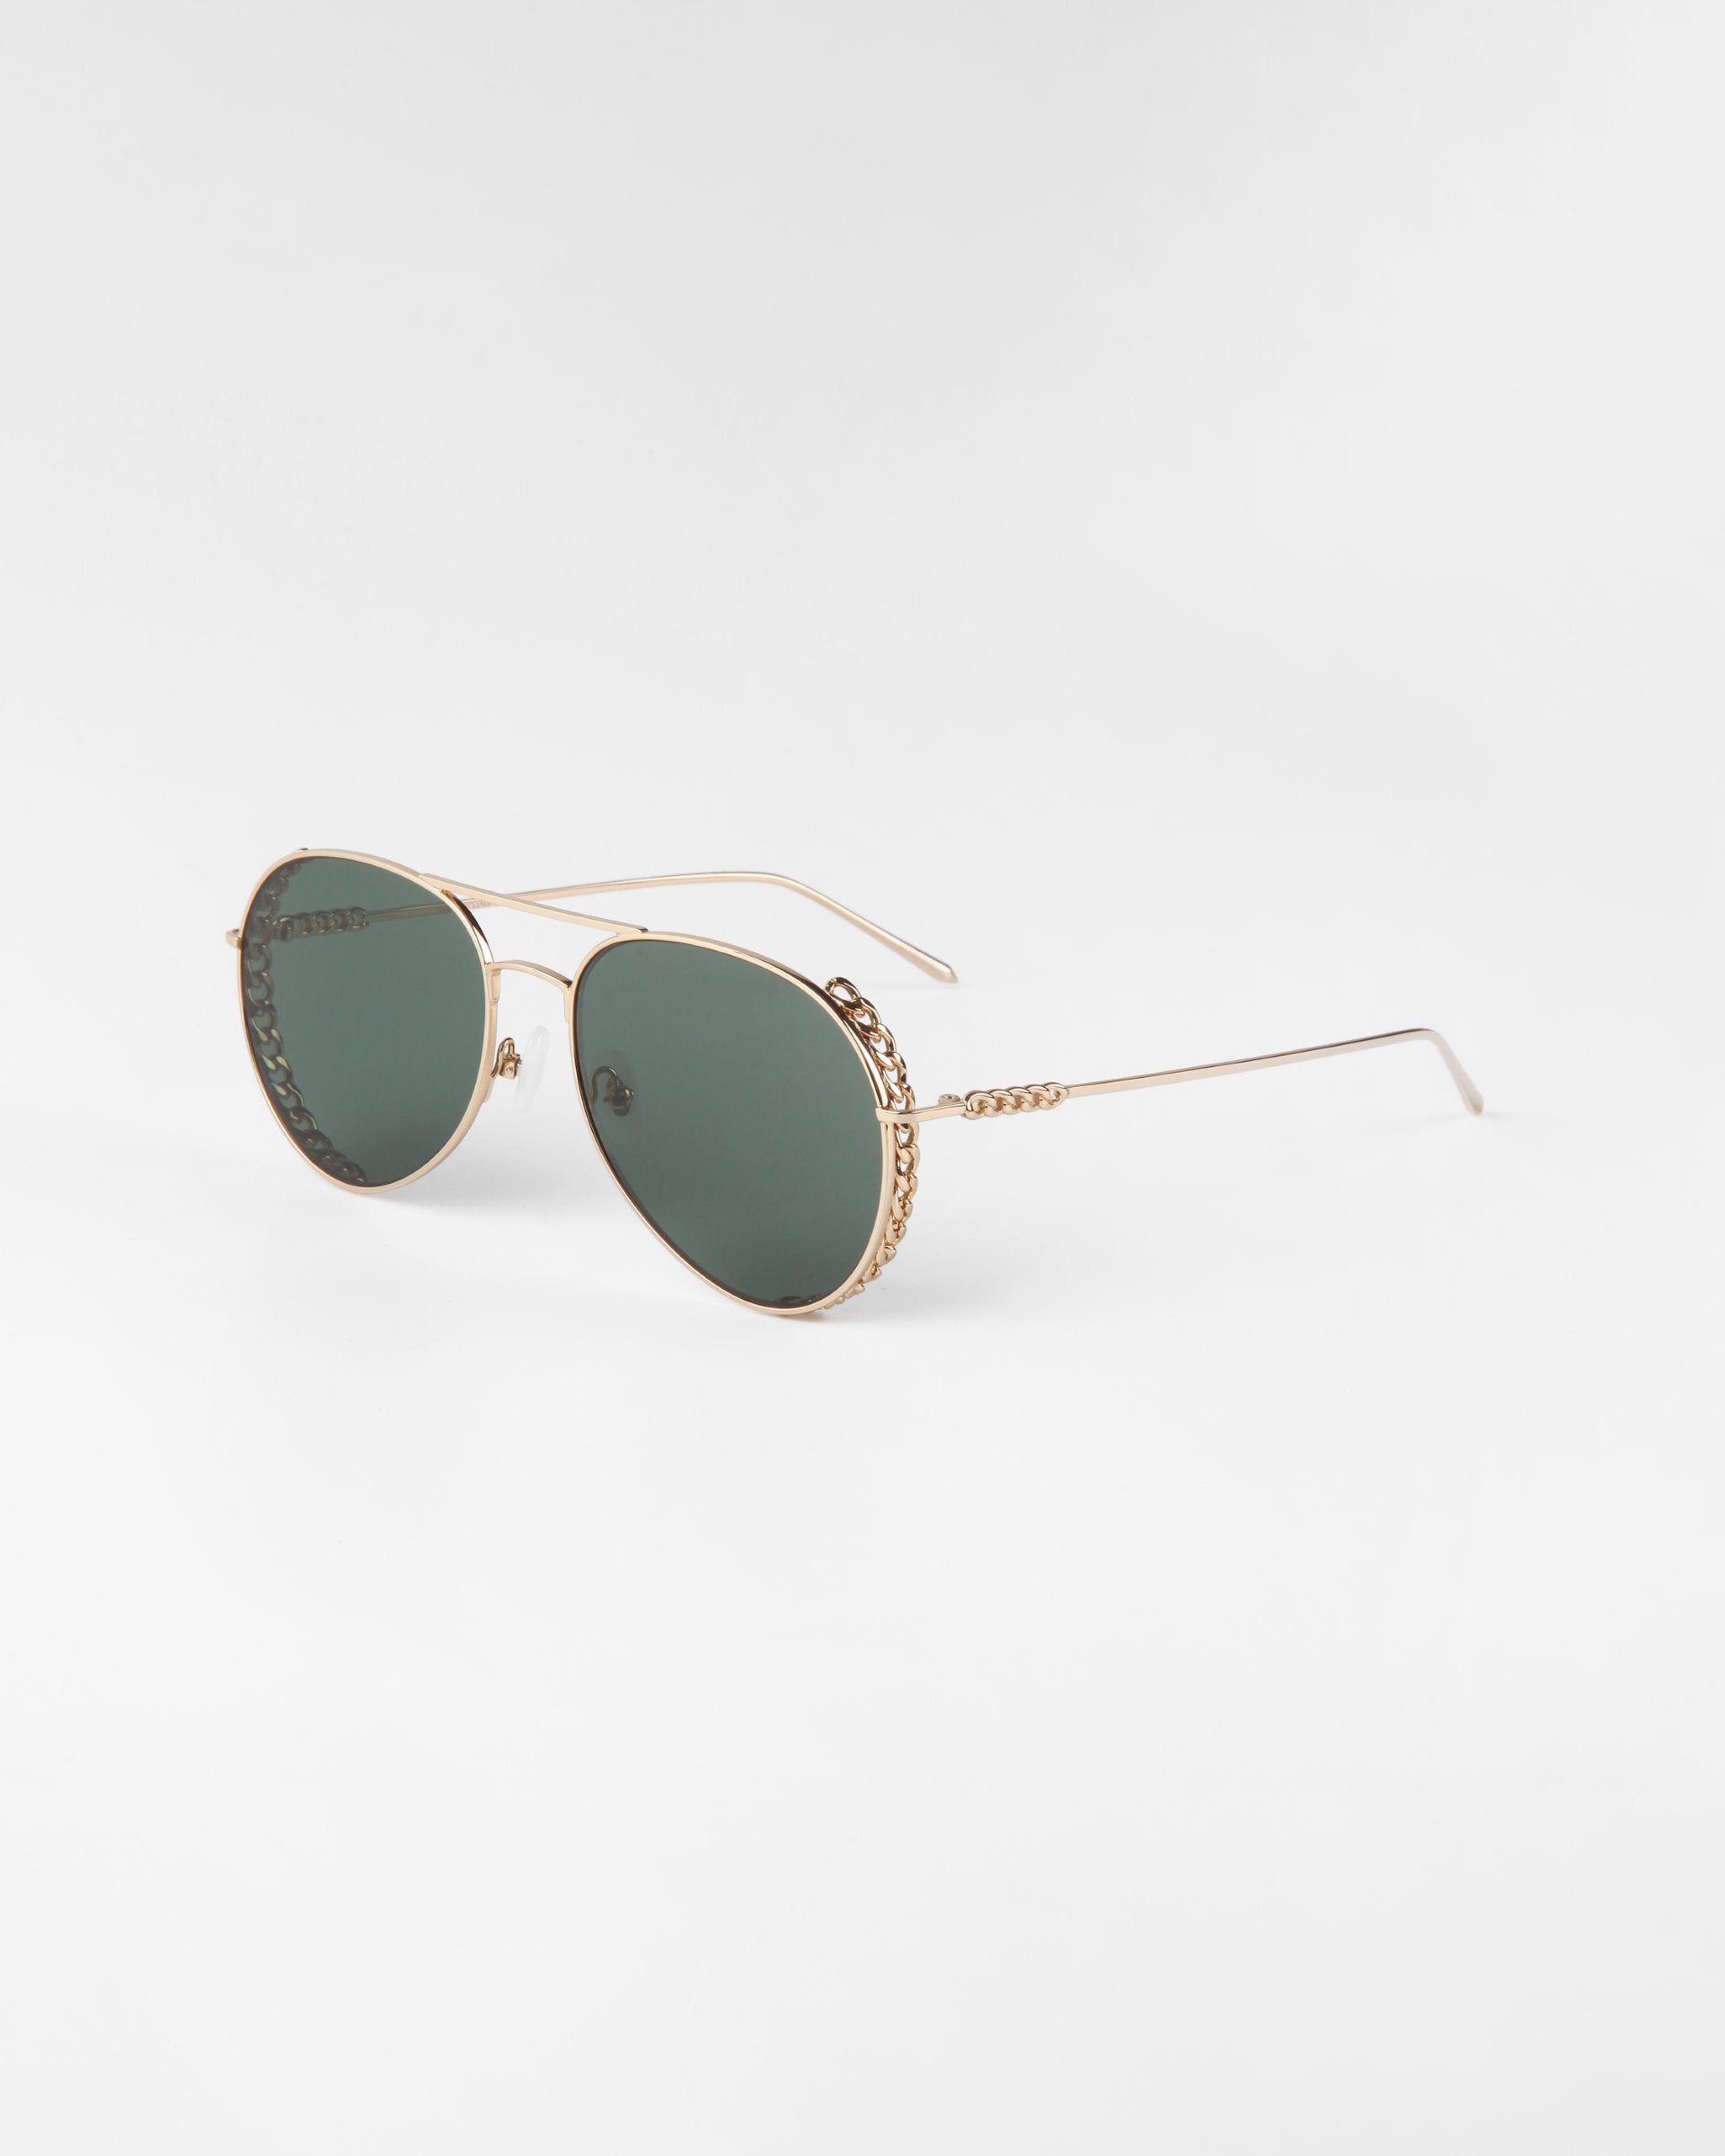 A pair of stylish Links aviator sunglasses by For Art&#39;s Sake® with thin gold-plated stainless steel frames and green nylon lenses. The gold temples feature a subtle chain detail near the hinges, adding a touch of elegance to the classic design. The Links sunglasses are set against a plain, light background.